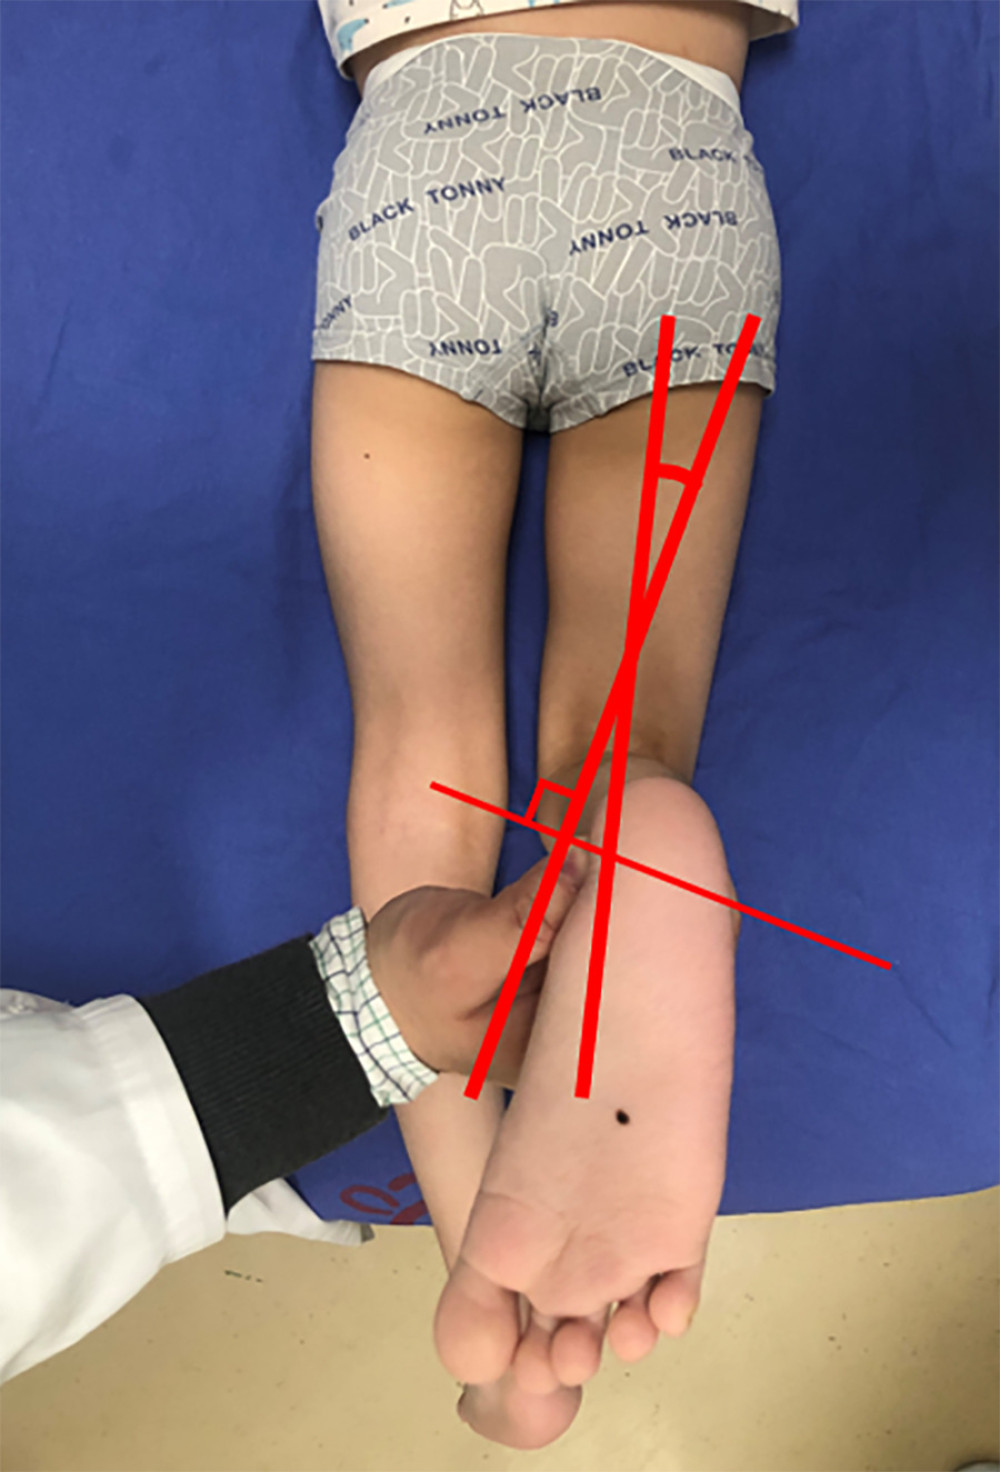 Clinical measurement of the tibial torsion by using the transmalleolar axis (TMA).